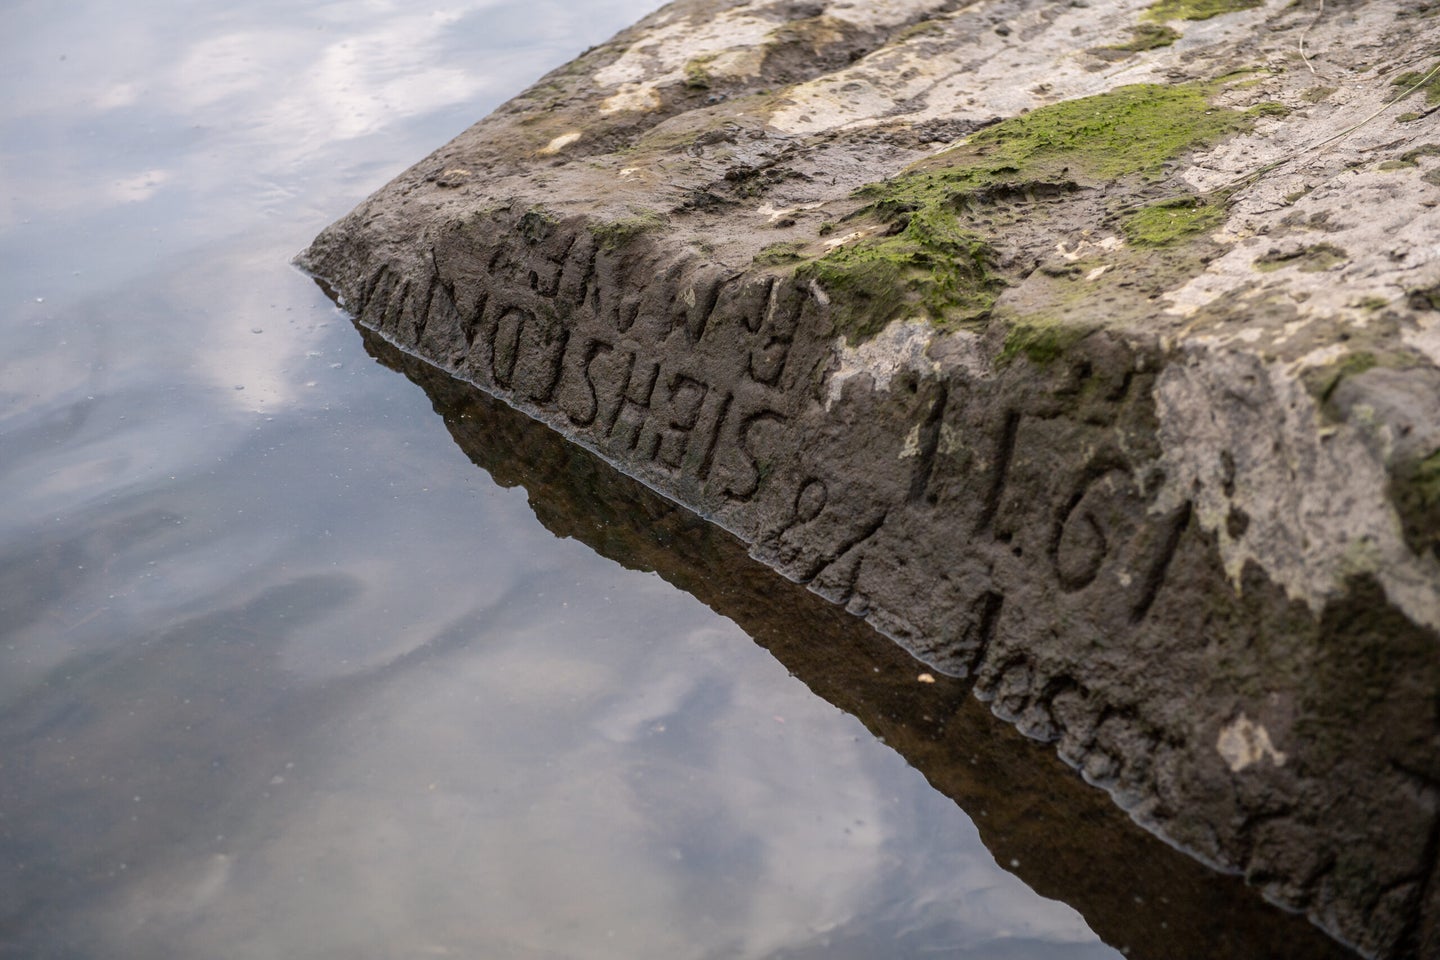 A prolonged drought lowered the level of the Elbe River so much that the so-called Hunger Stone, one of the oldest hydrological monuments in Central Europe, appeared in Decin, Czech Republic on August 18, 2022. It heralded the famine years - reduced harvests due to drought. The stone is engraved with the years, the oldest from 1616, and inscriptions, the most distinct of which are the old German "Wenn du mich siehst, dann weine"